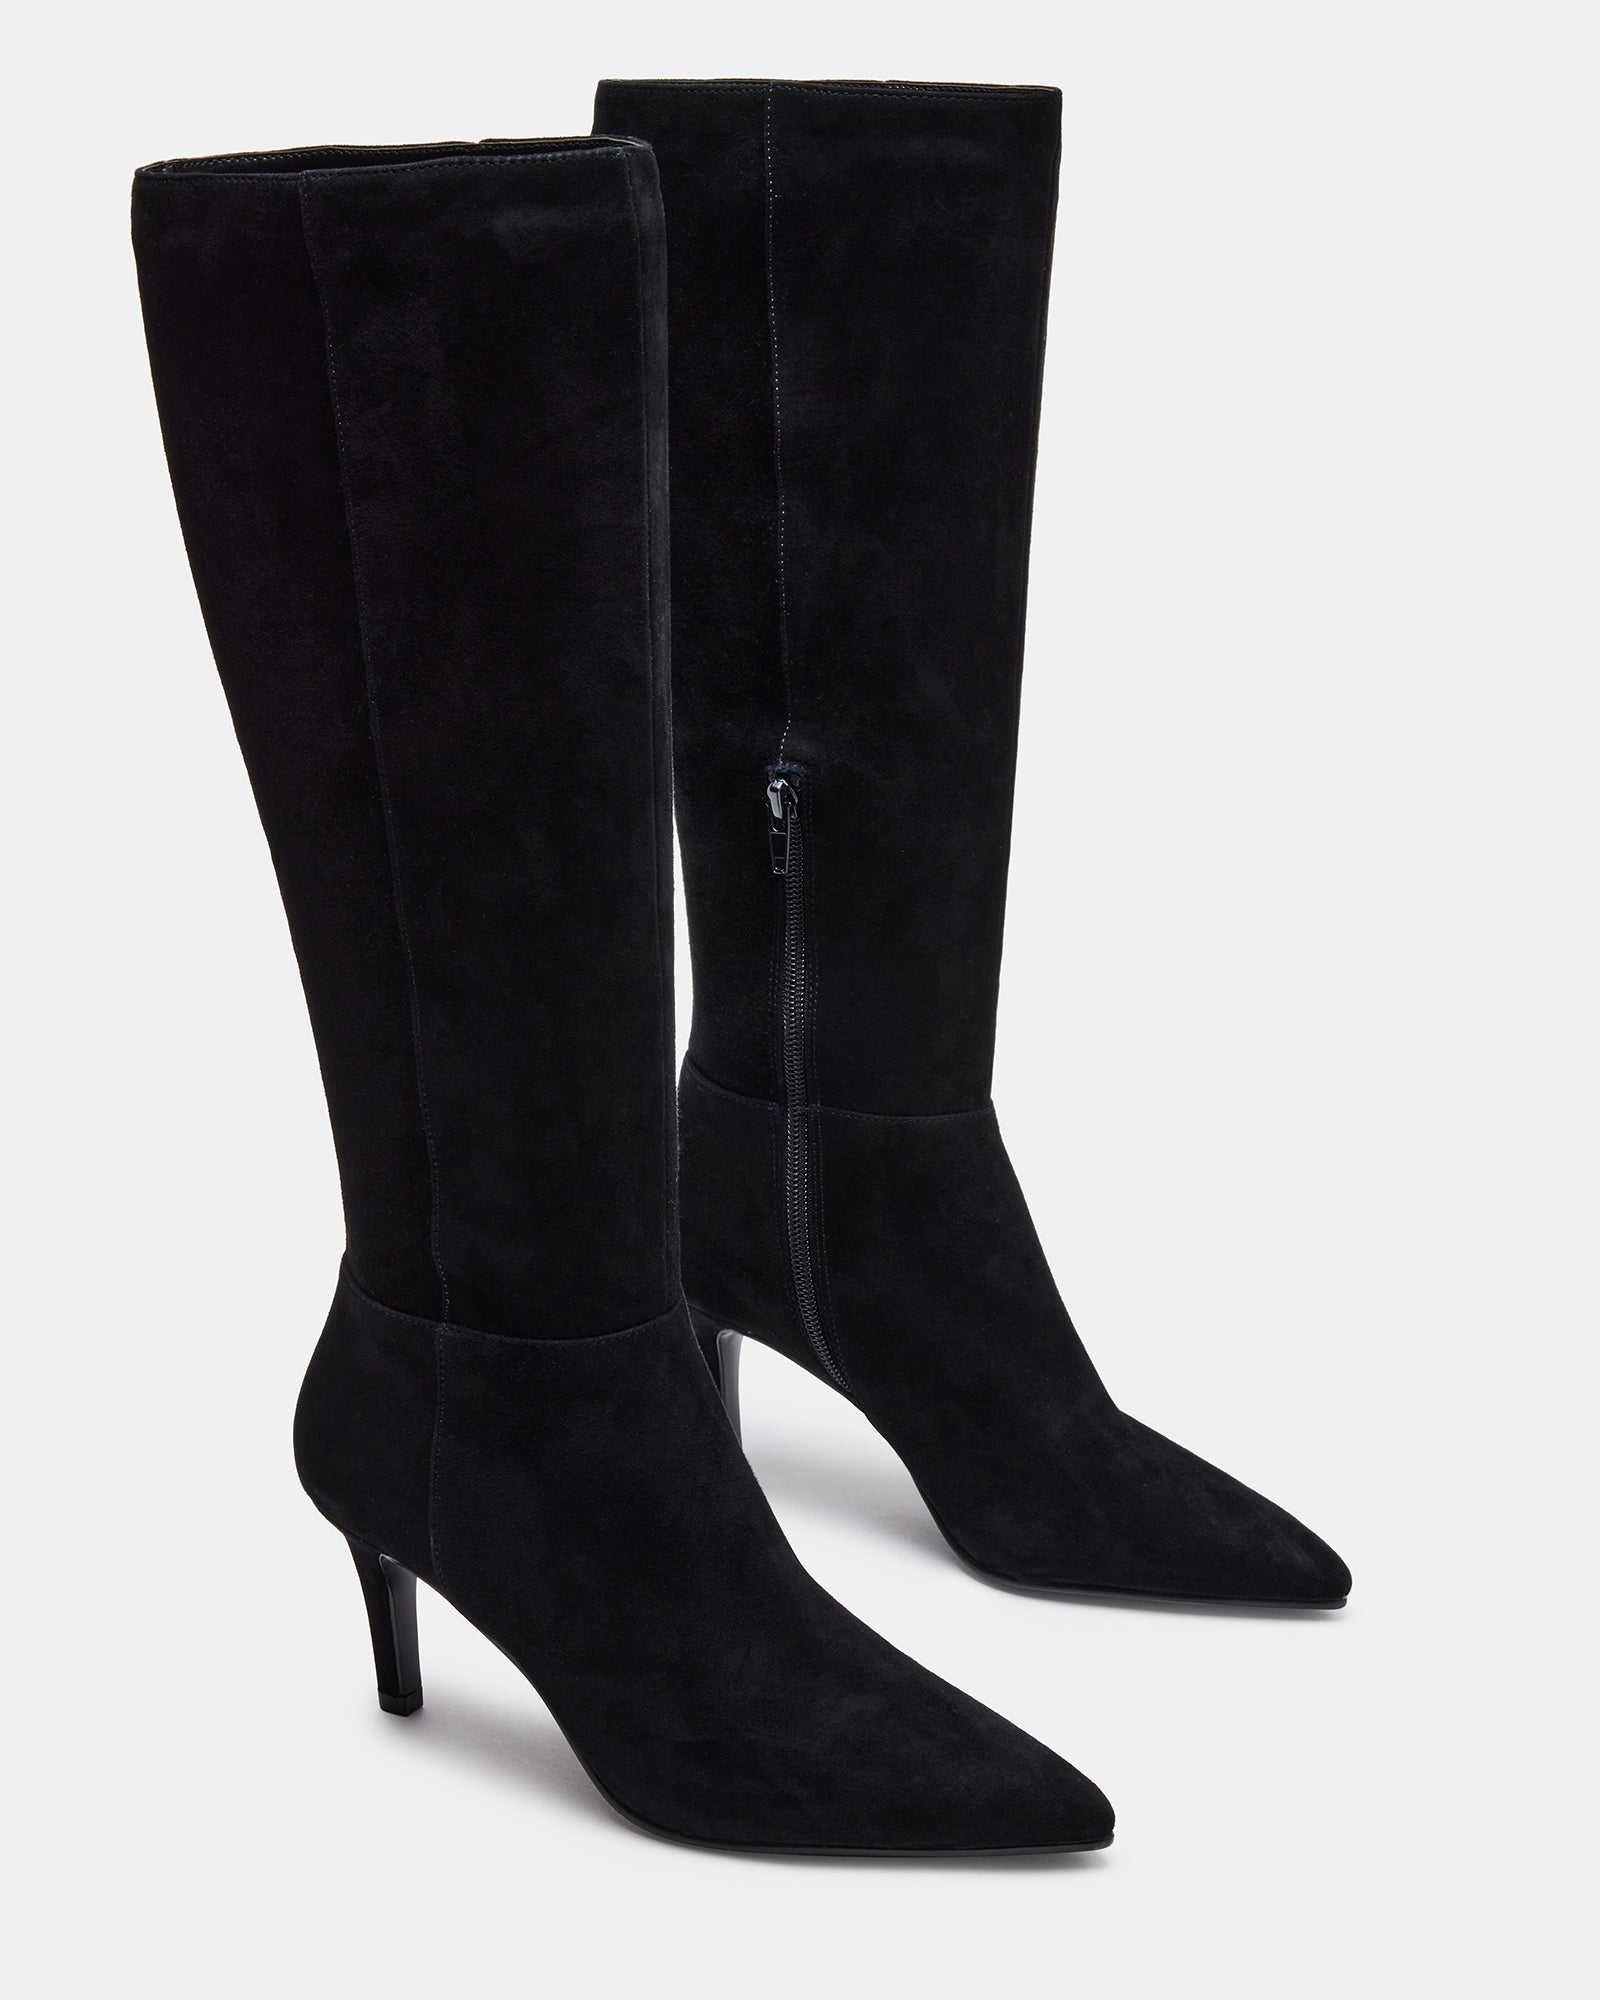 JANAE Black Suede Point Toe Knee High Boot | Women's Boots – Steve Madden